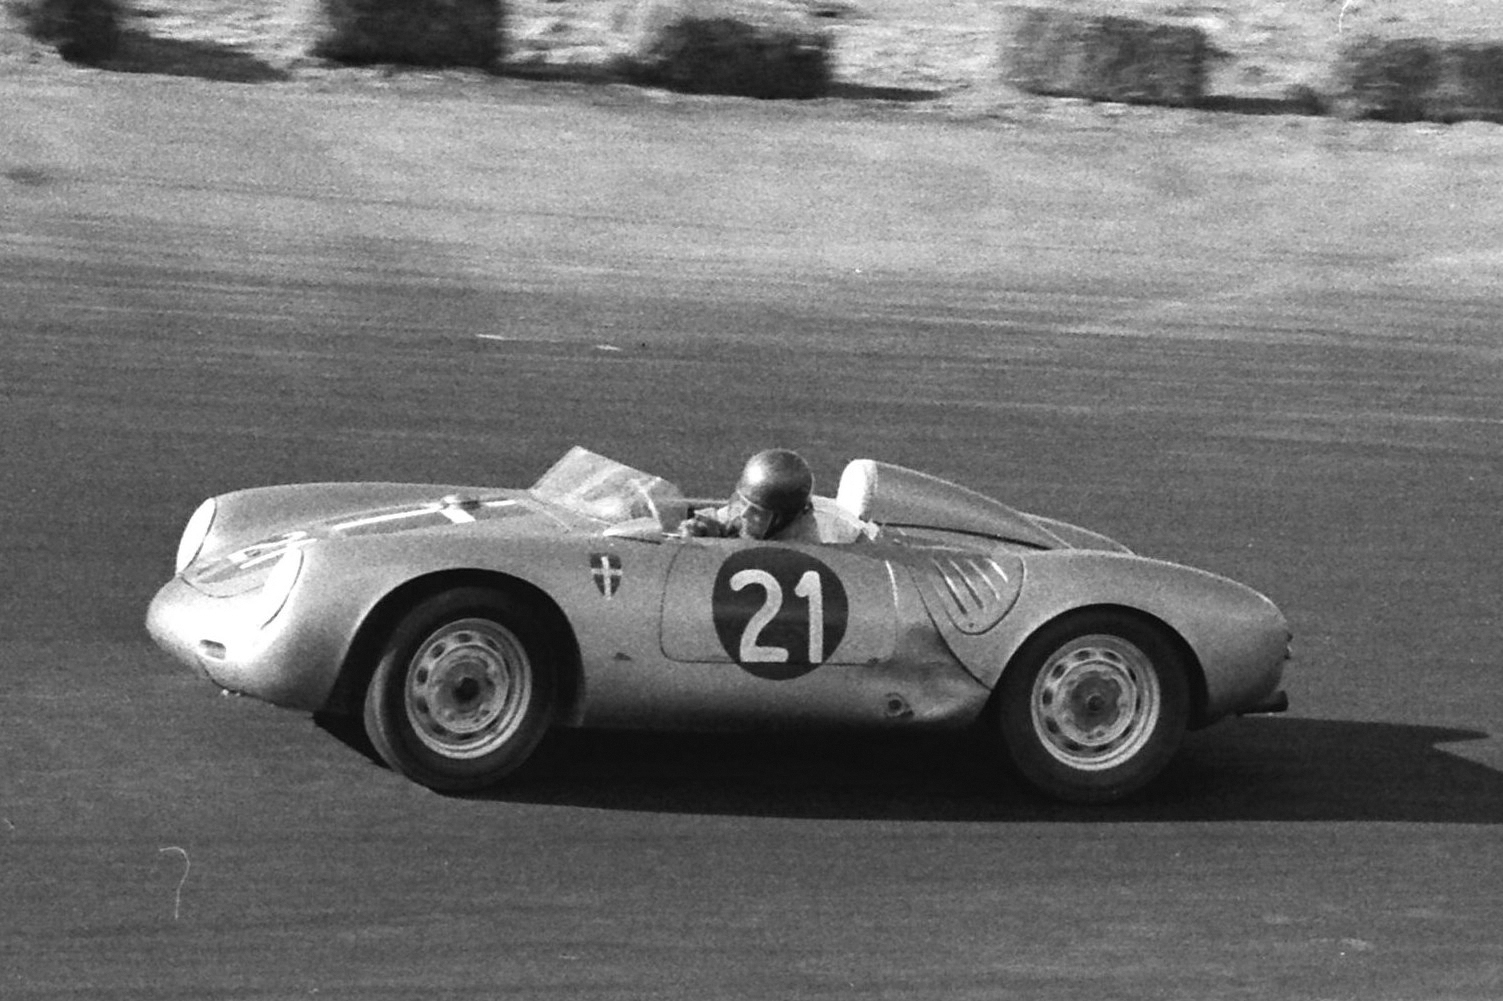 957-08.09 Julius Voigt-Neilsen in 550A-0121 chases Ian Raby in his Cooper Climax at Roskilde, Denmark in September of 1957(Courtesy of Carsten Frimodt) RM Sotheby's Villa Erba sale